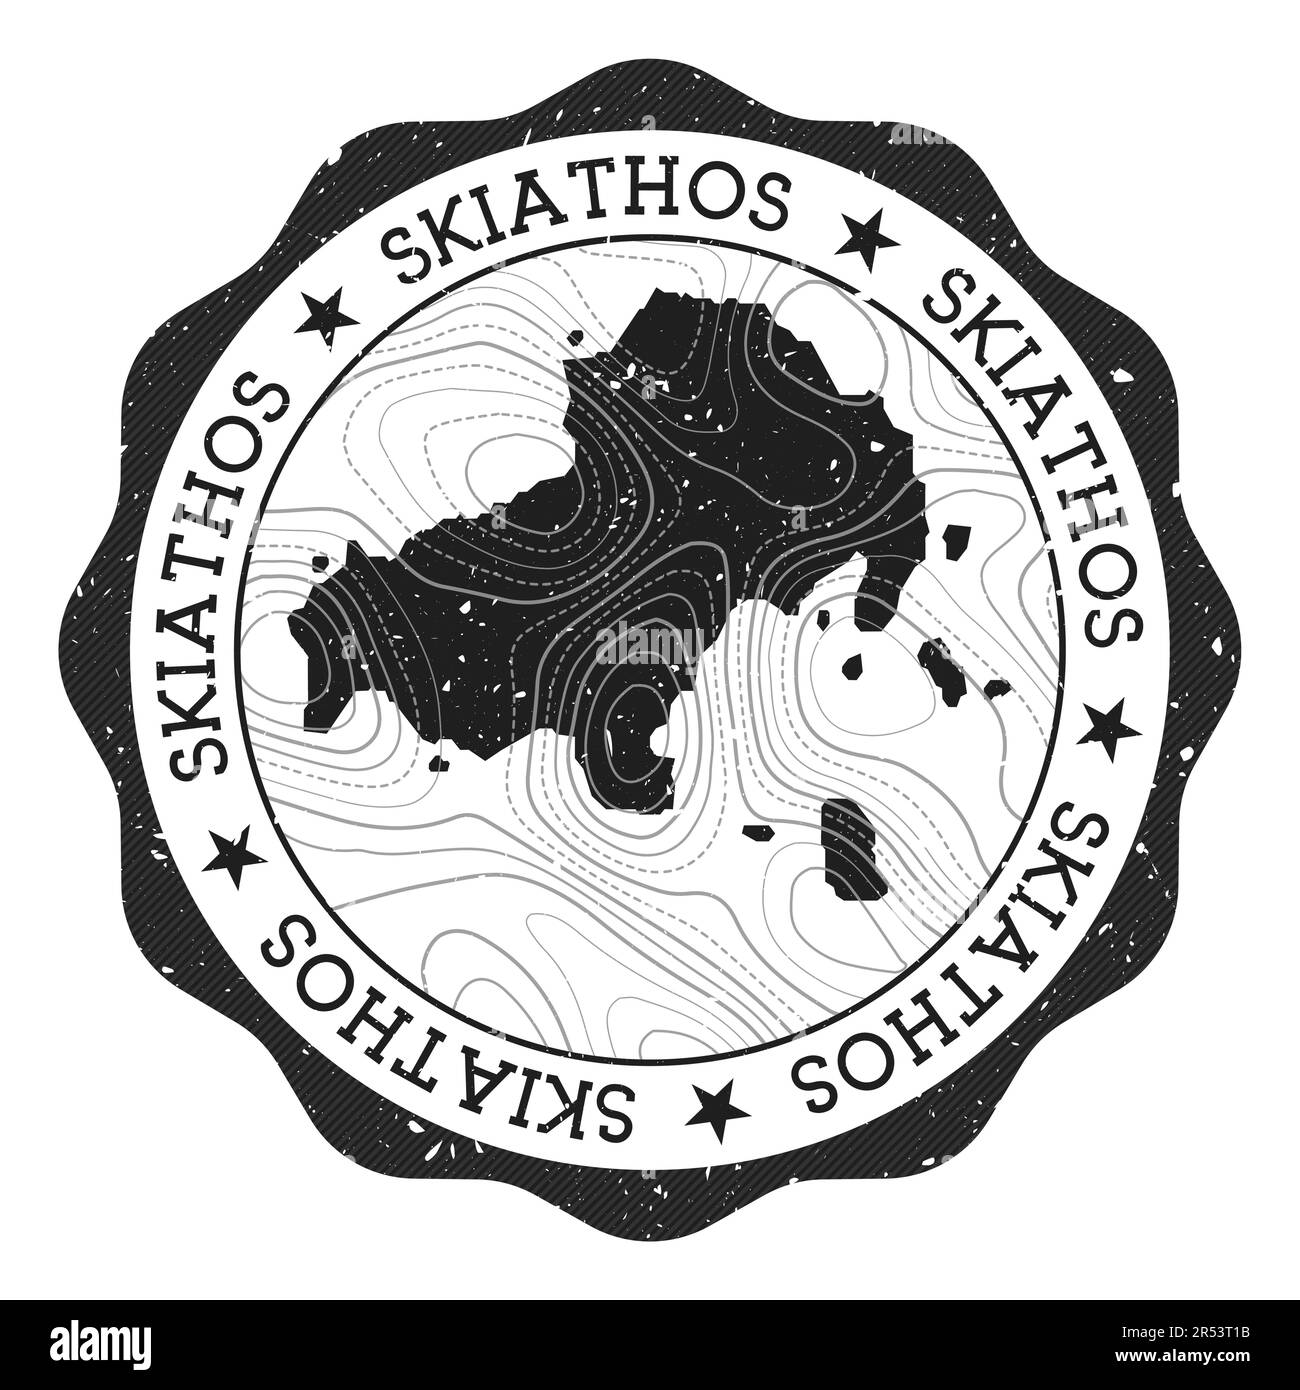 Skiathos outdoor stamp. Round sticker with map of island with topographic isolines. Vector illustration. Can be used as insignia, logotype, label, sti Stock Vector